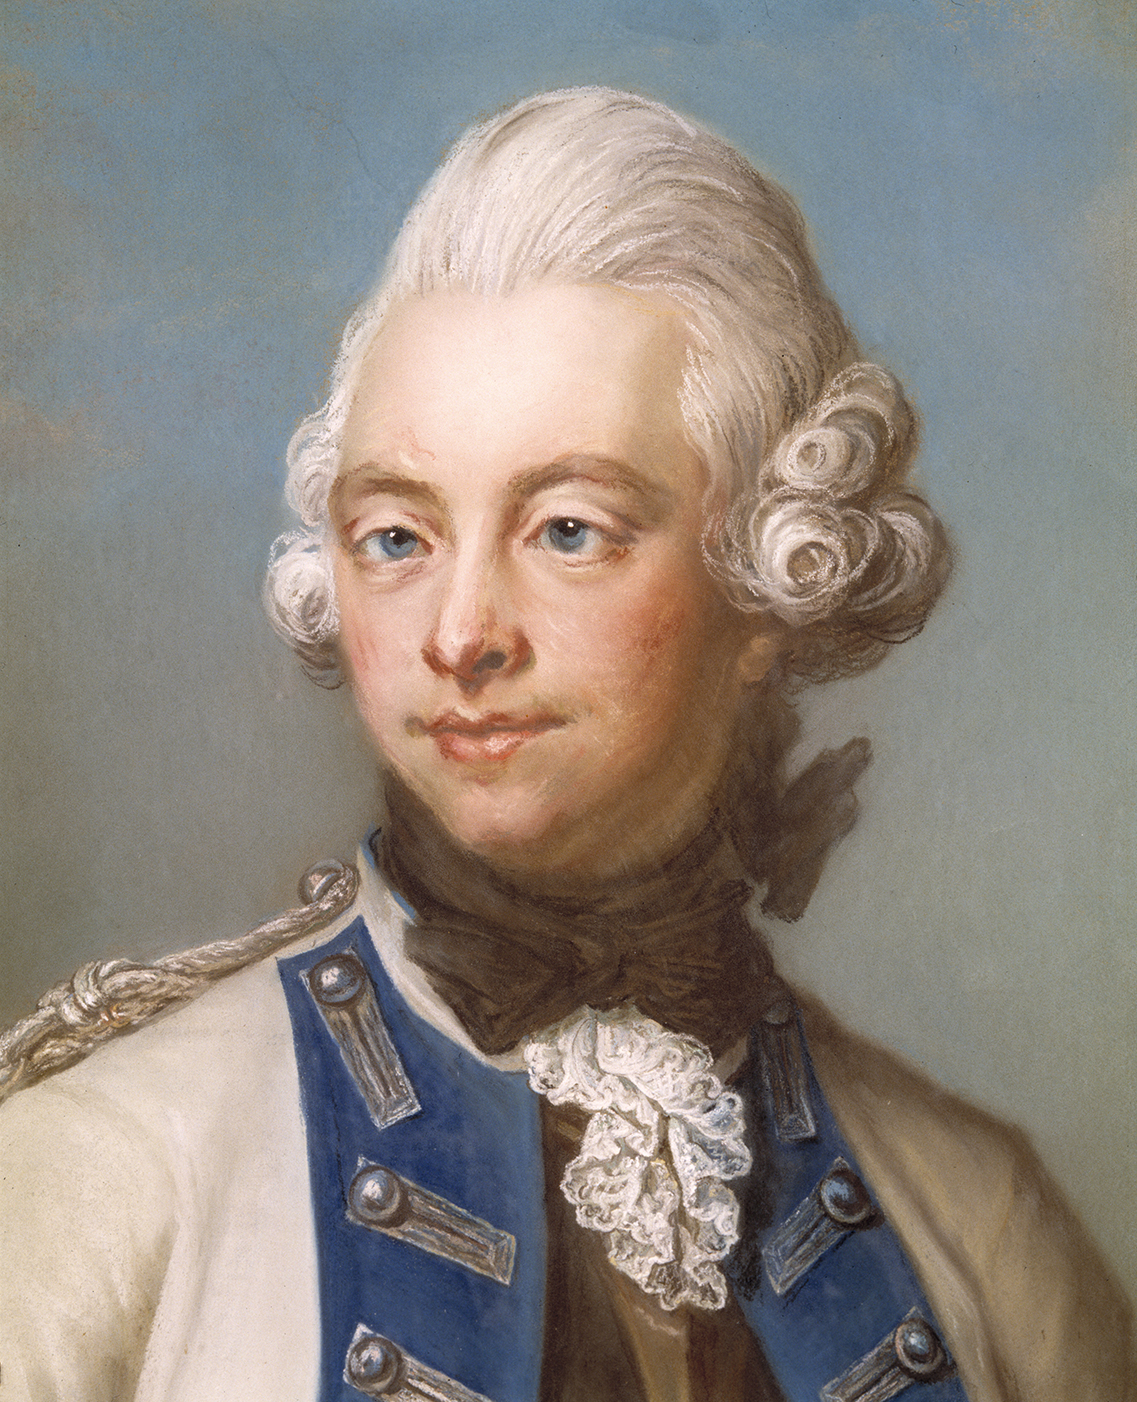 Per Brahe wearing a white uniform with blue facings. He is wearing a powdered whig.